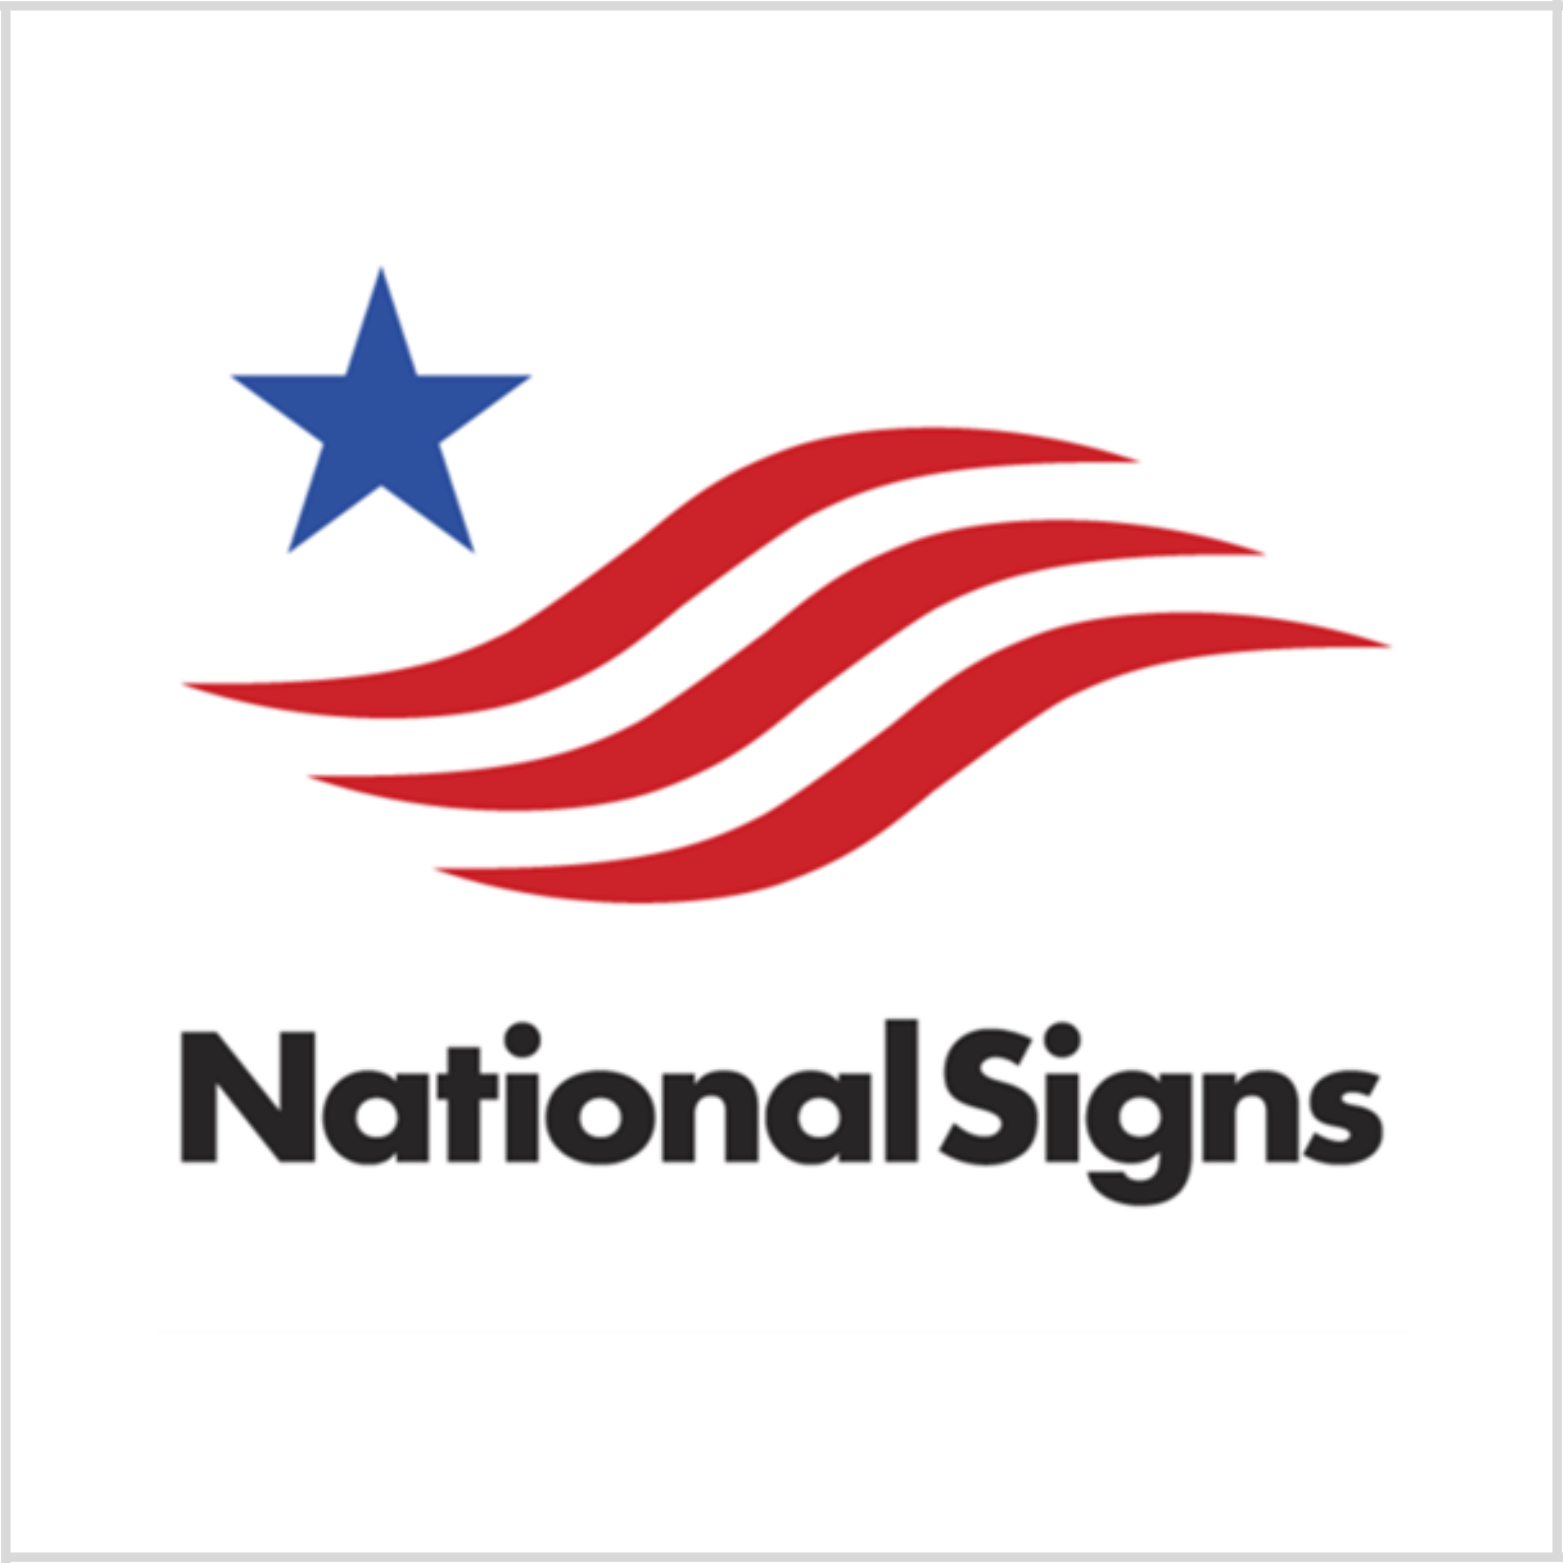 National Signs.png